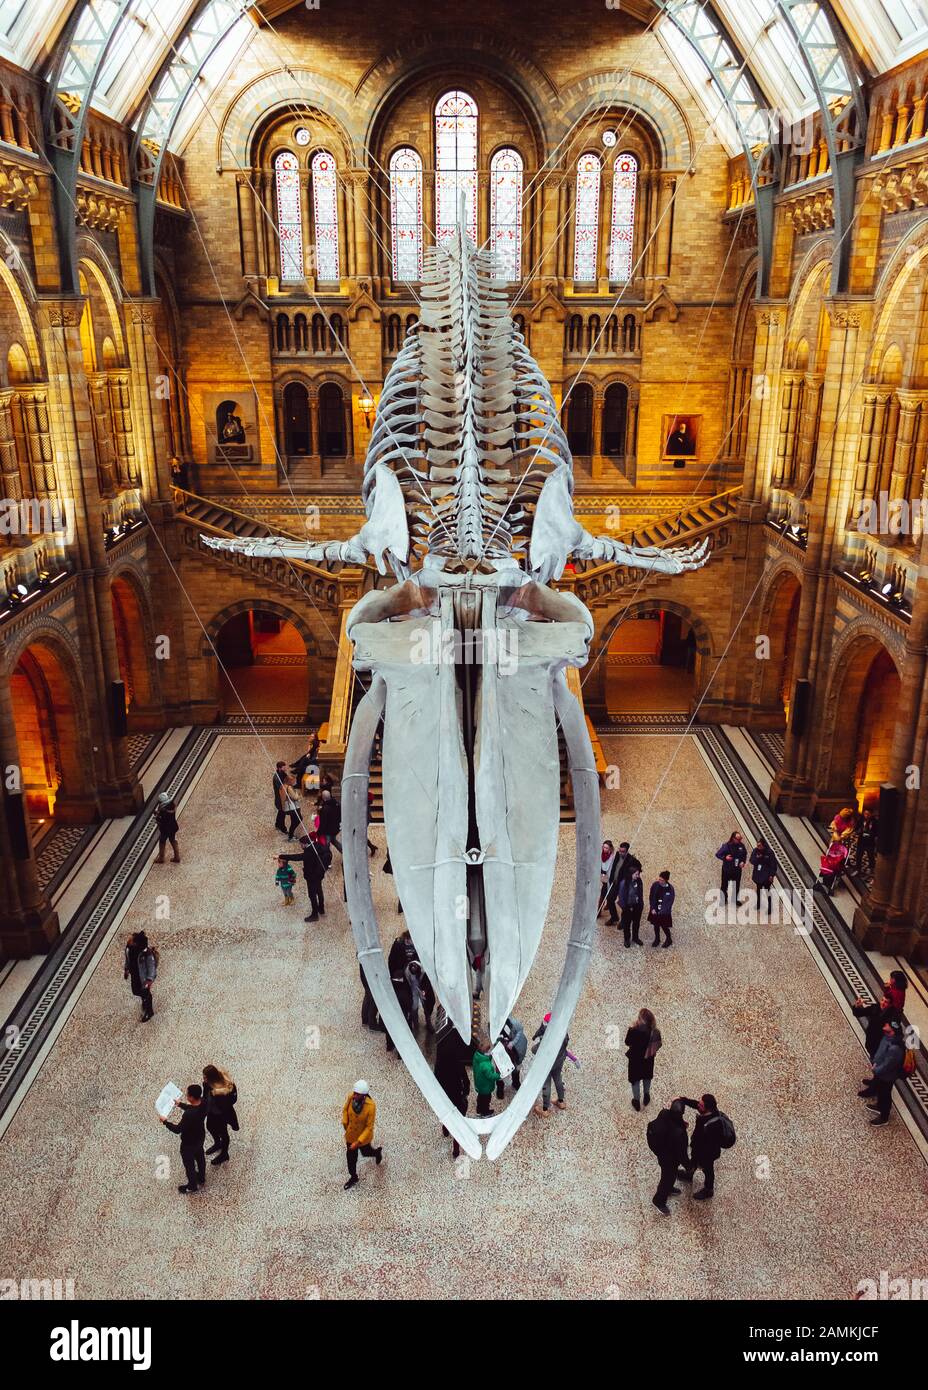 London, UK/Europe; 21/12/2019: Blue whale skeleton in the main hall of the Natural History Museum of London Stock Photo